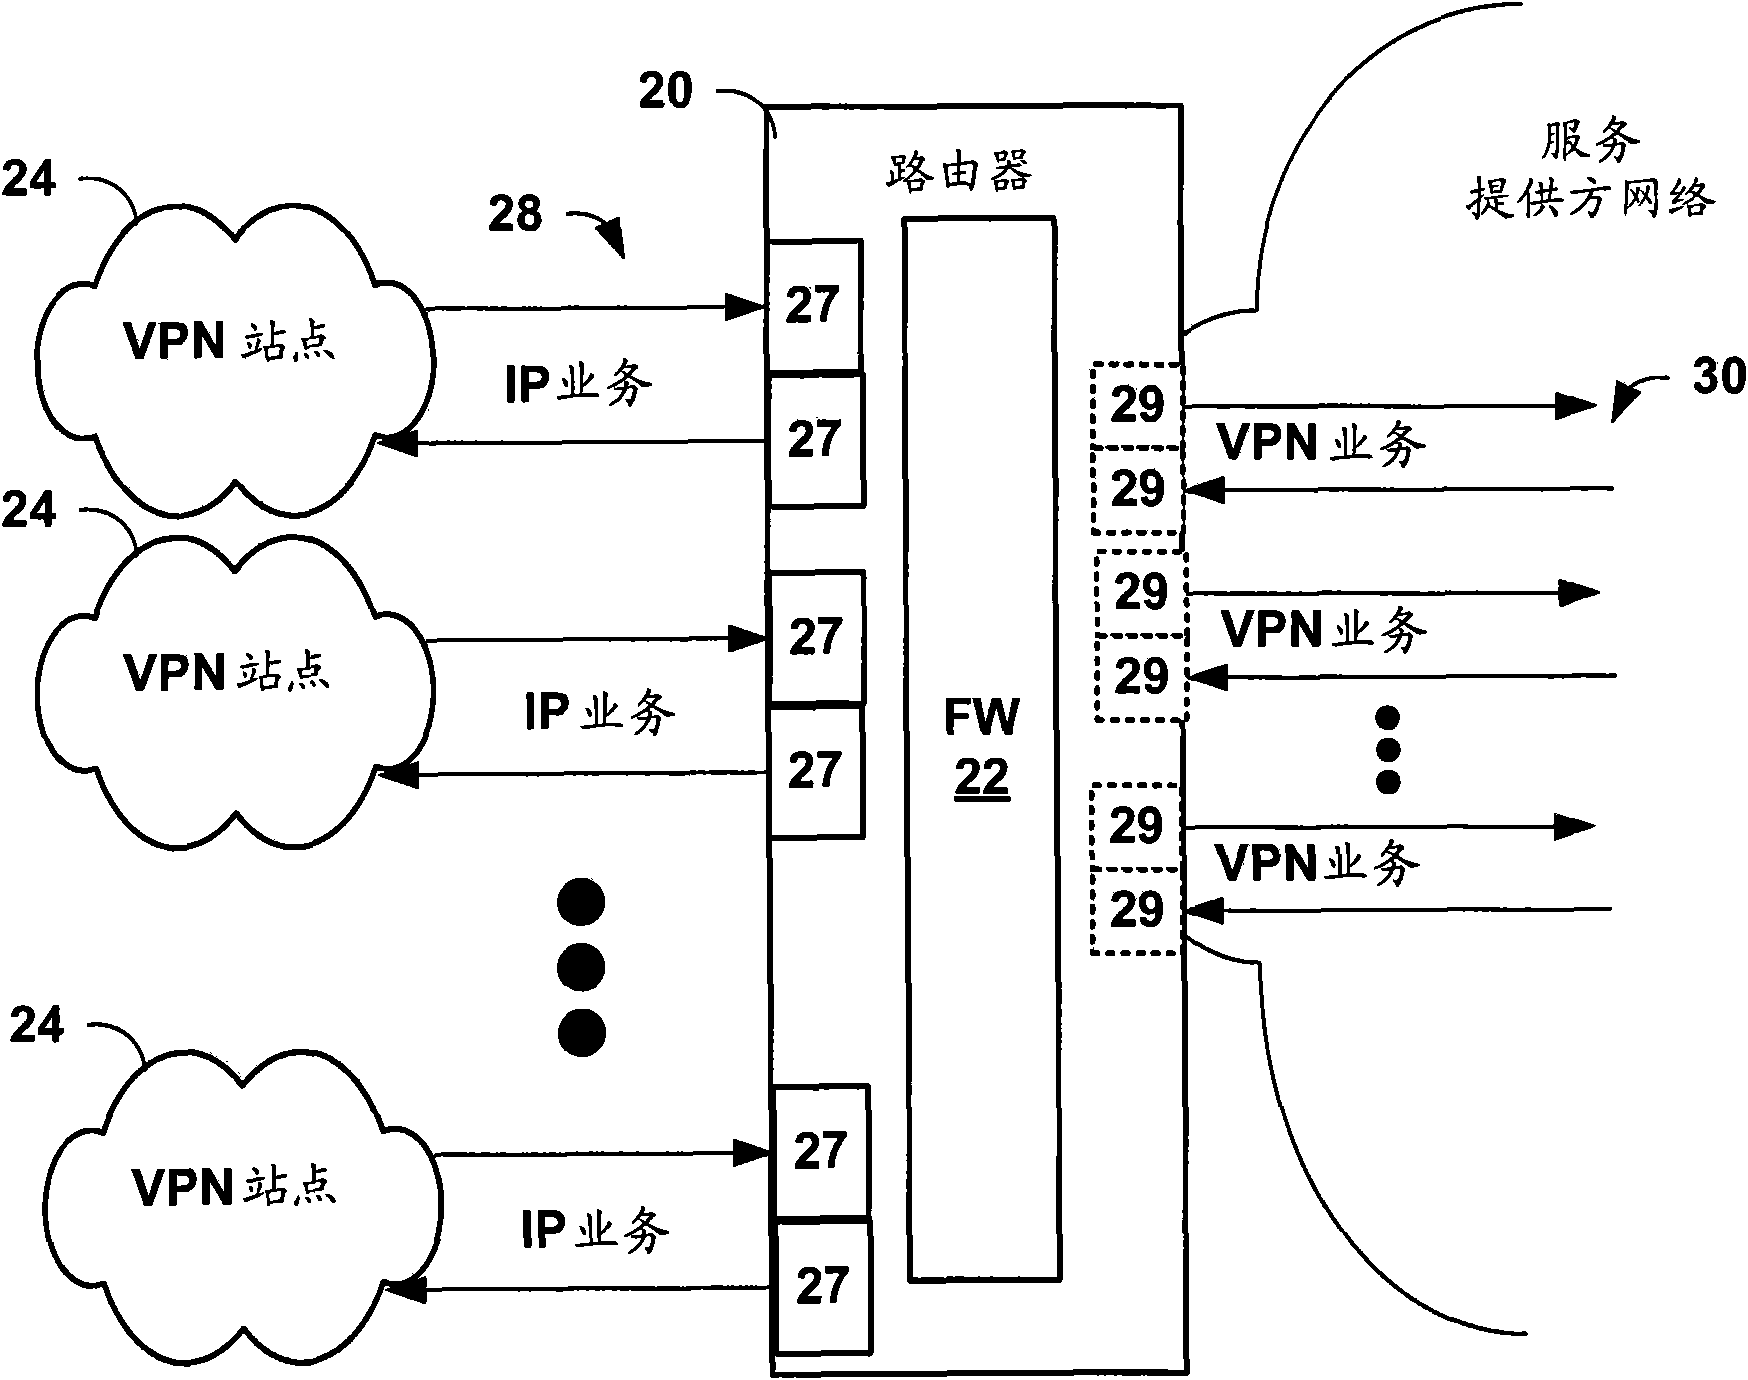 Routing device having integrated MPLS-aware firewall